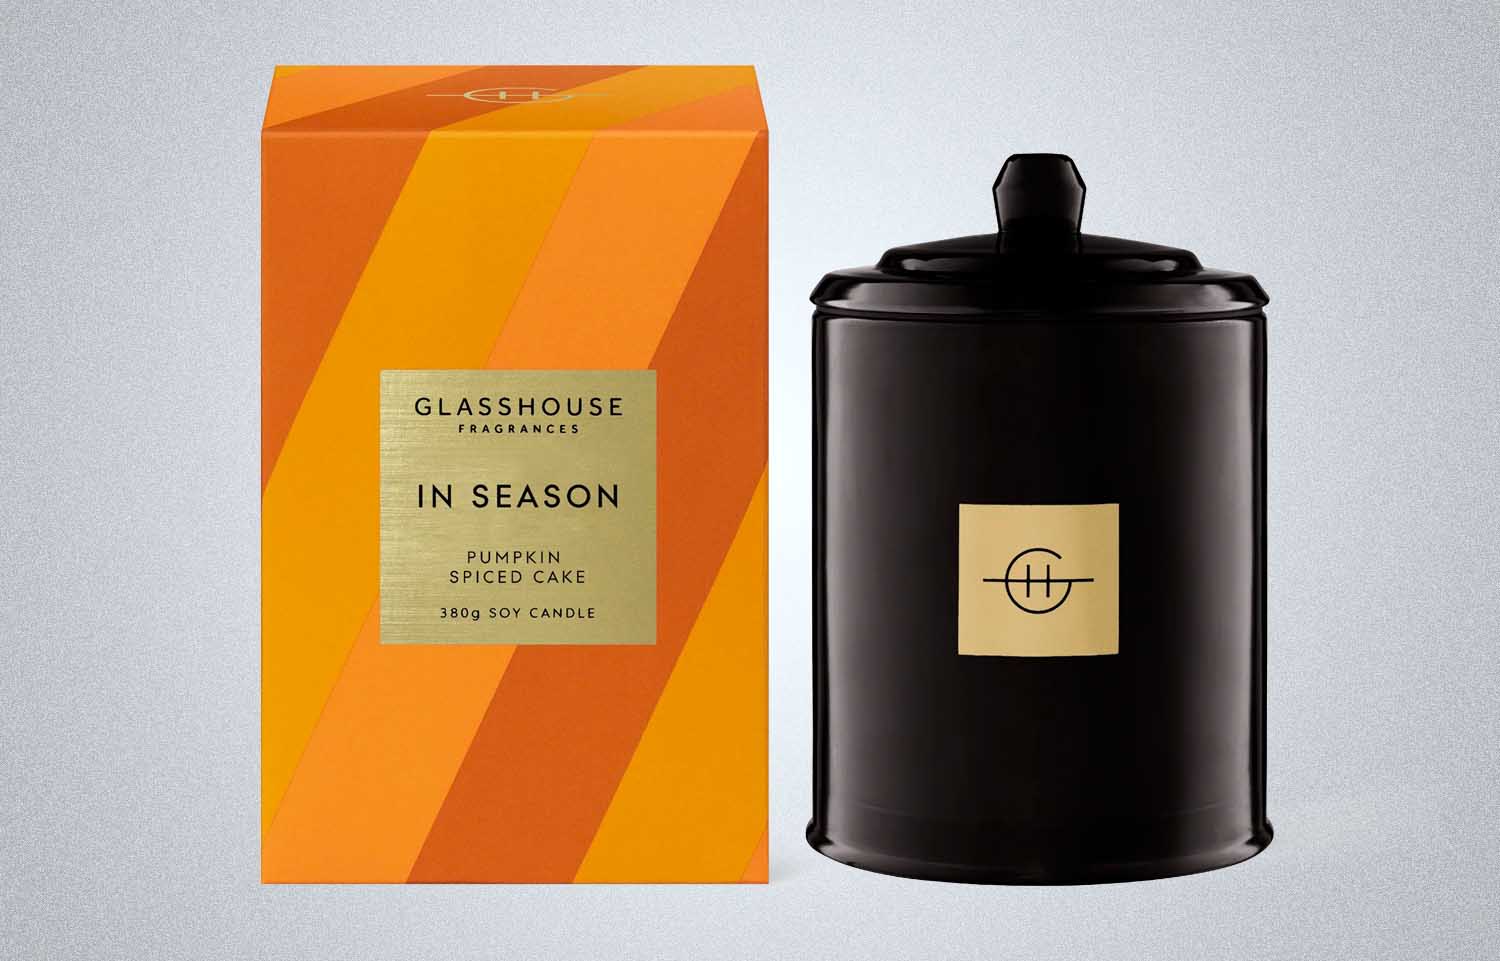 Glasshouse Pumpkin Spiced Candle